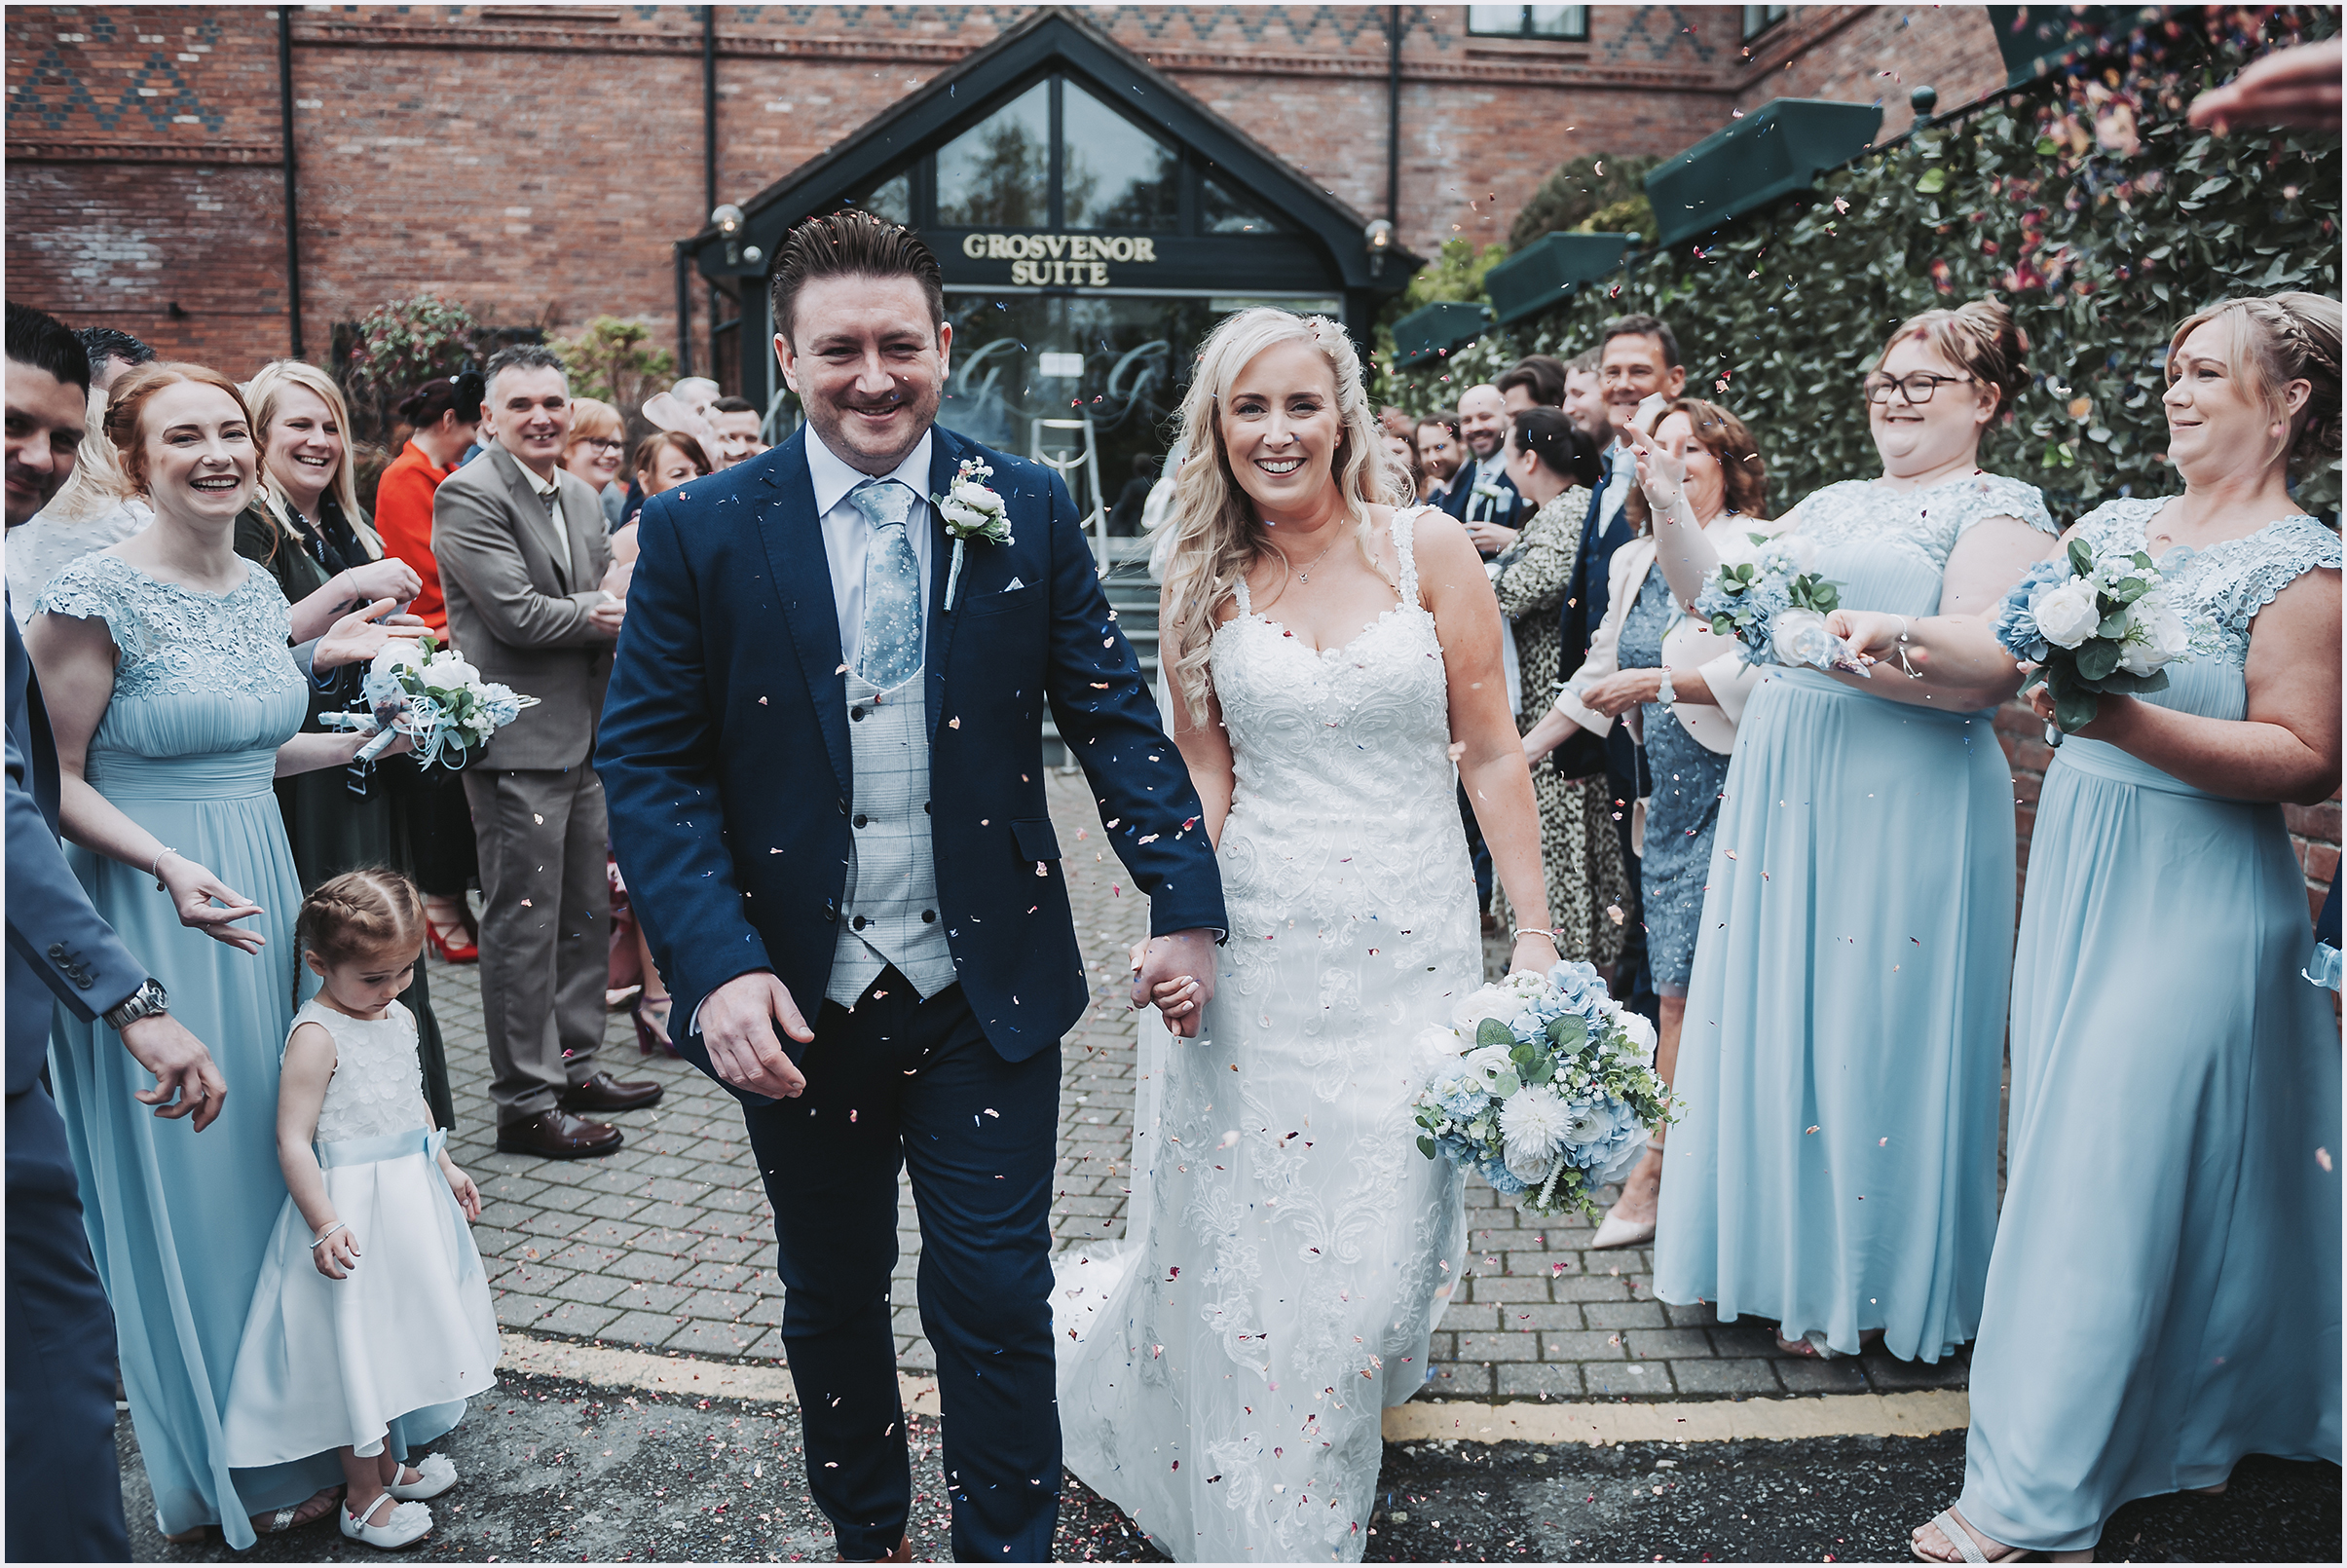 A newly married couple smile at the camera as their guests throw confetti at them at The Grosvenor Pulford Hotel and Spa